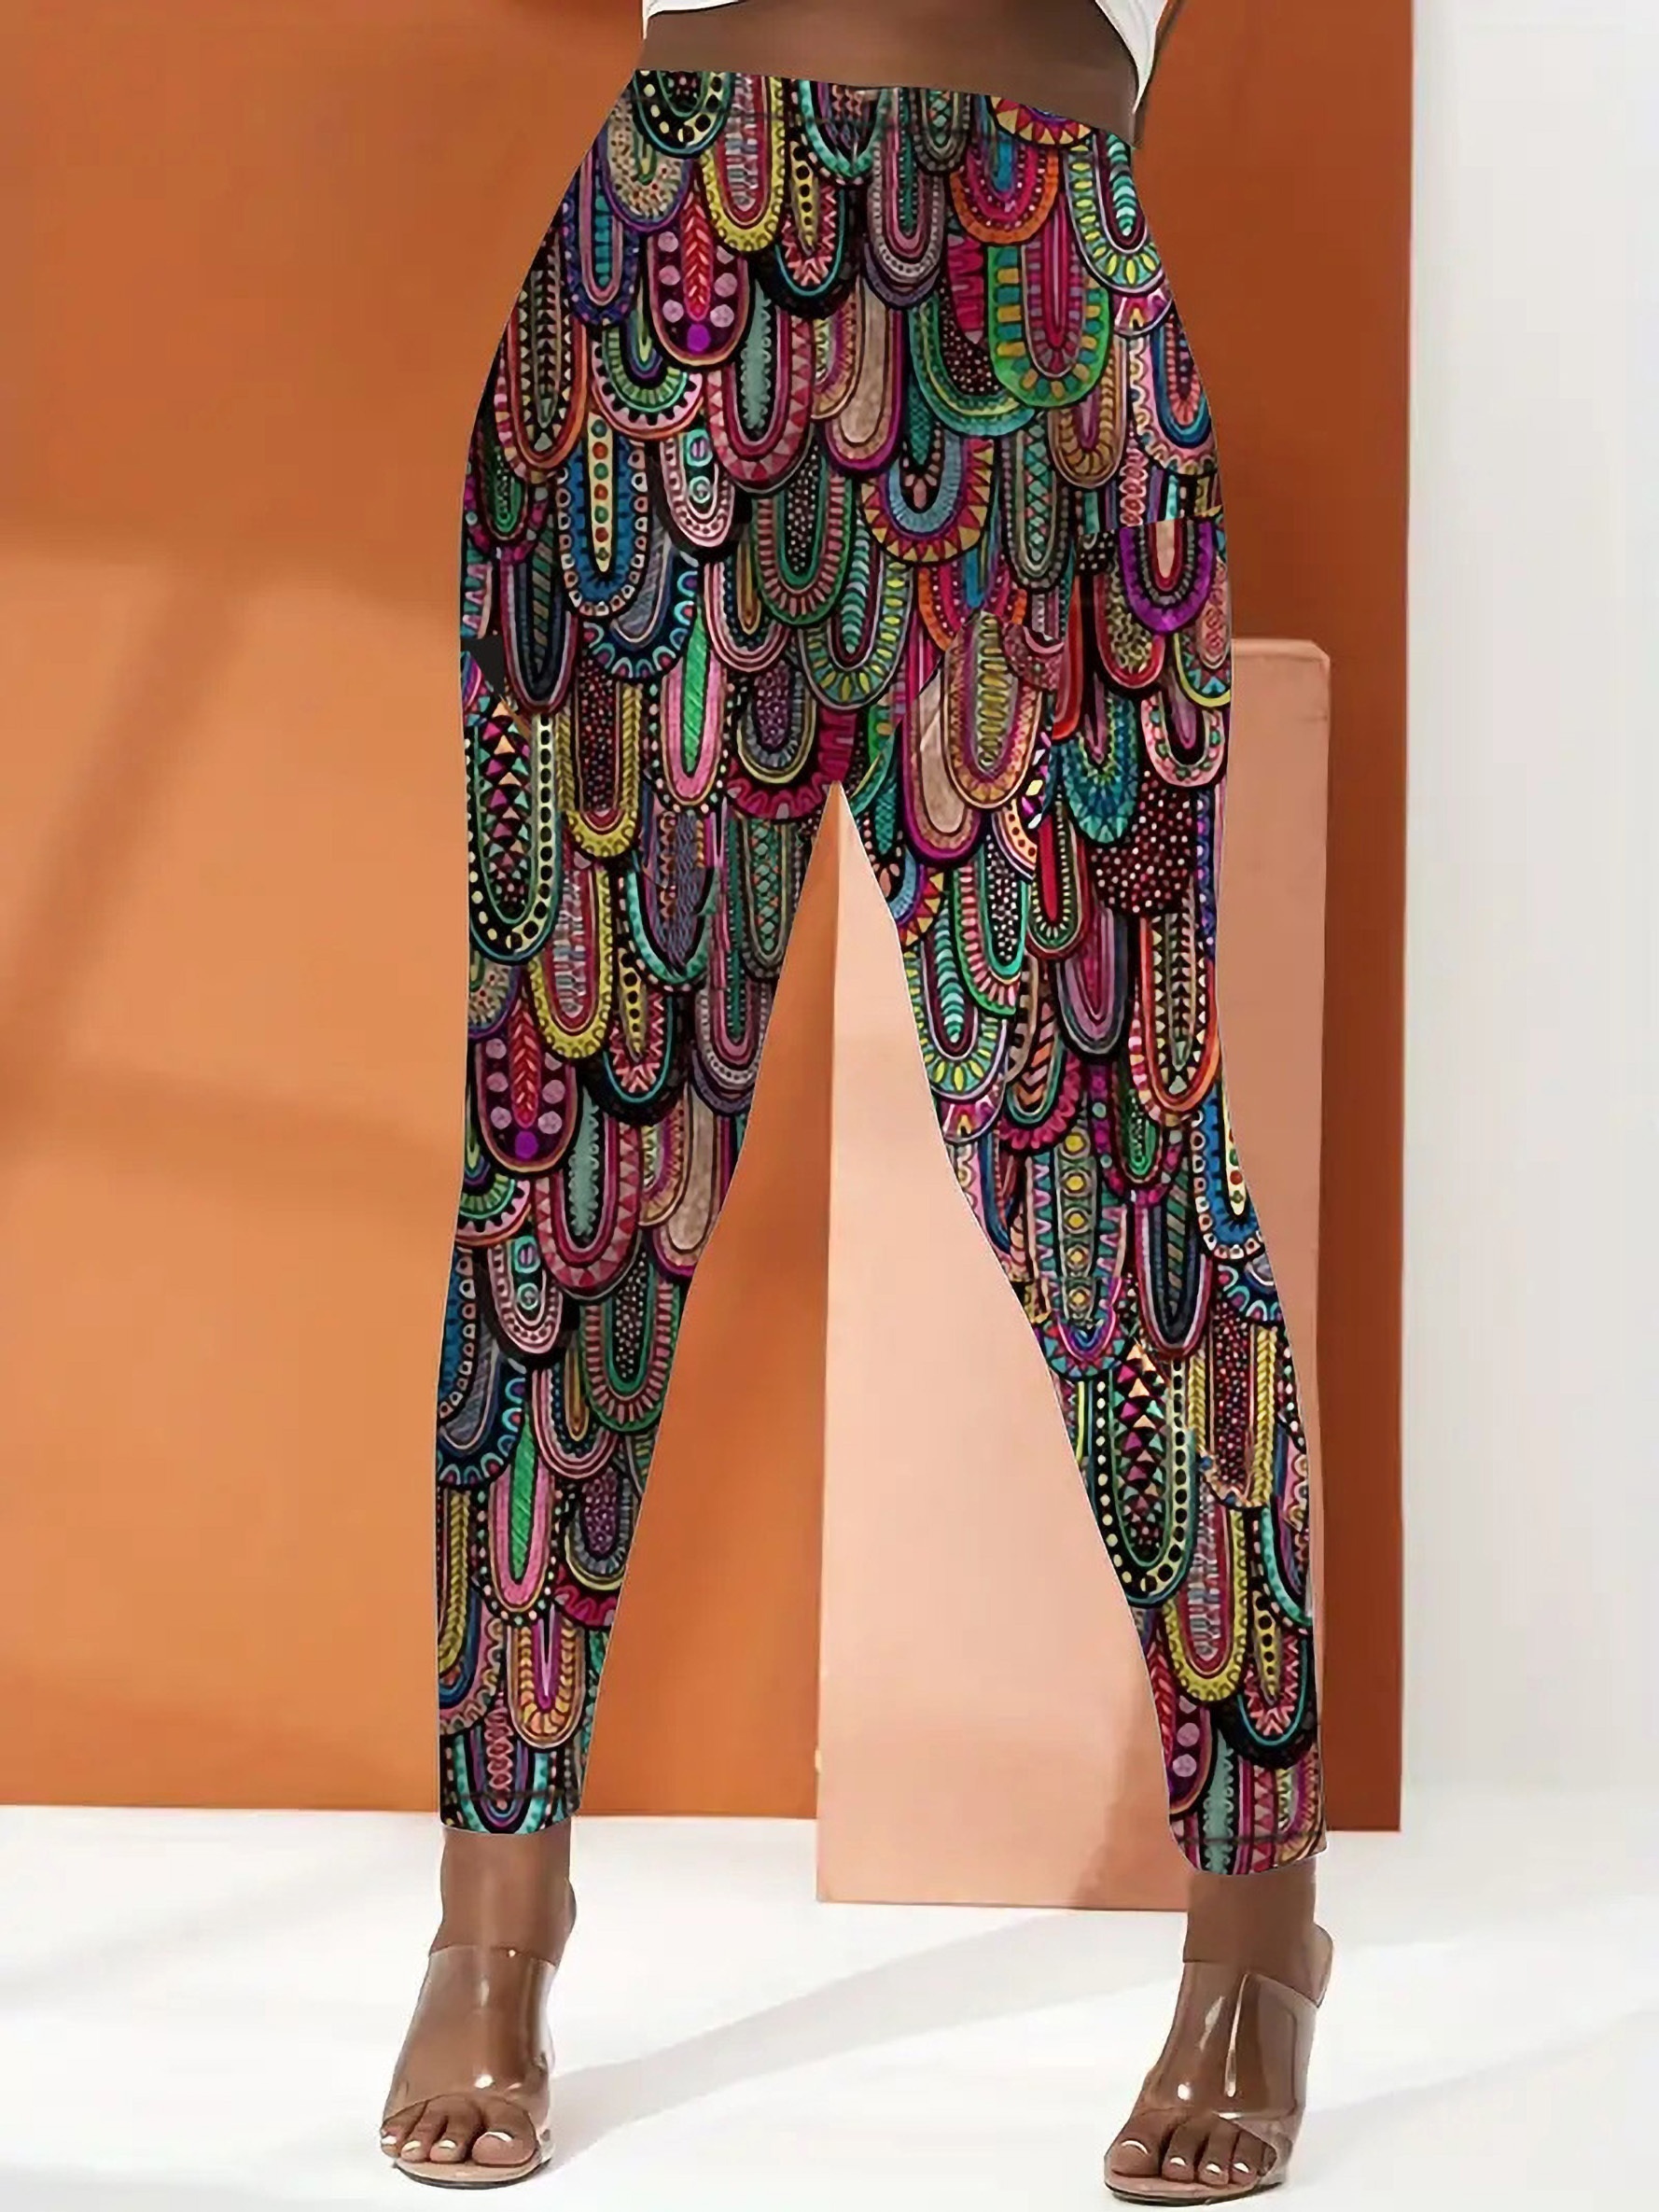 Patterned Leggings for Women, Colourful Yoga Pants, Plus Sizes and